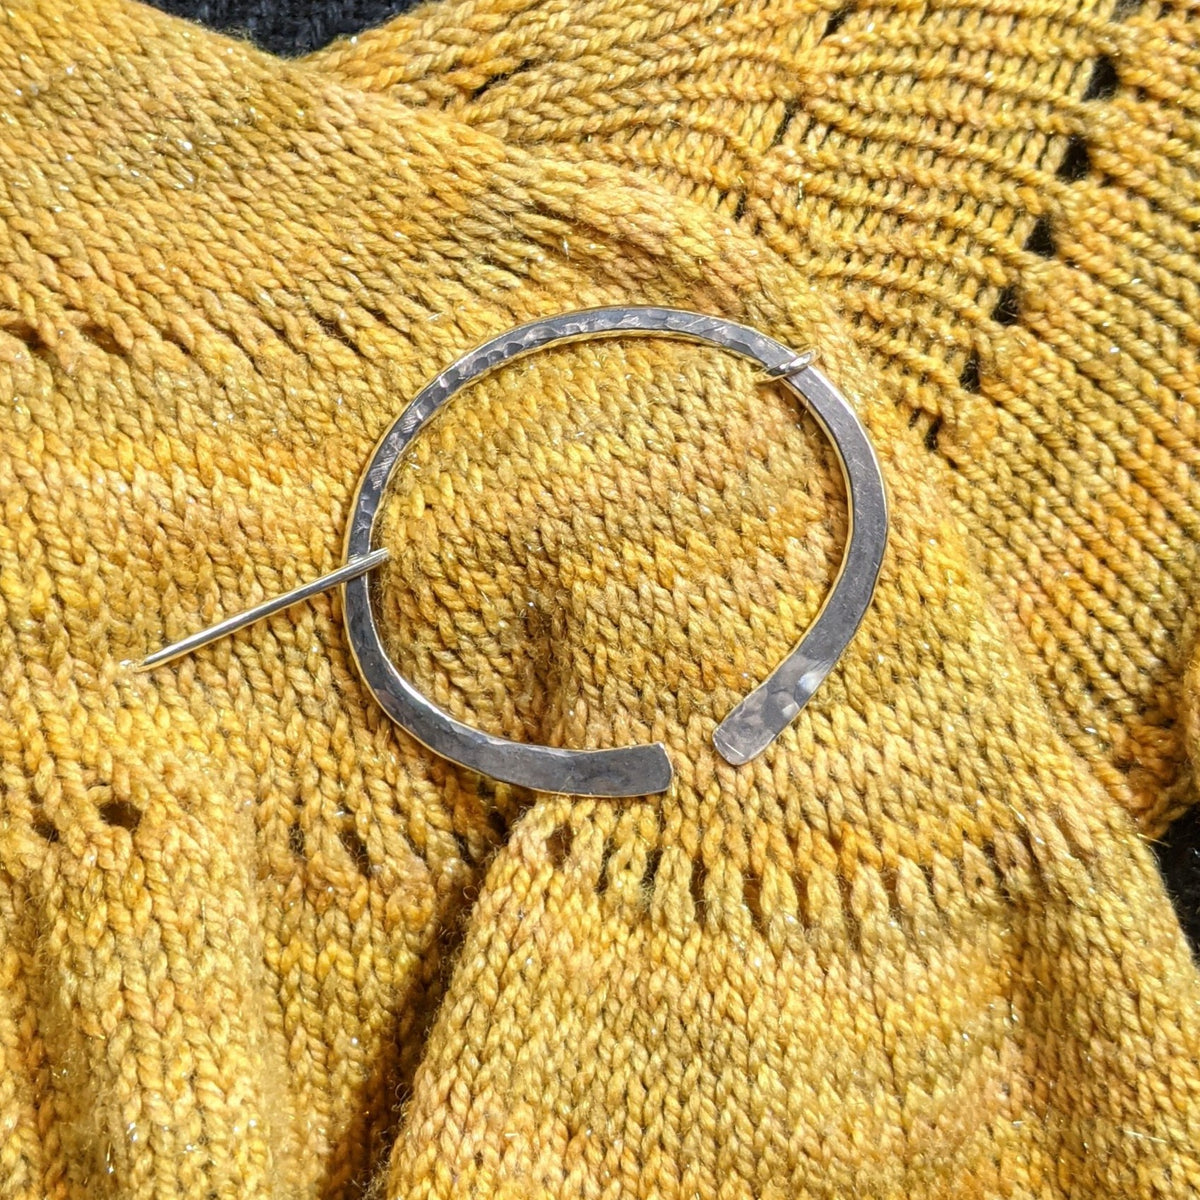 Sterling silver penannular shawl in with a hammered surface texture, pinning a yellow shawl shut.